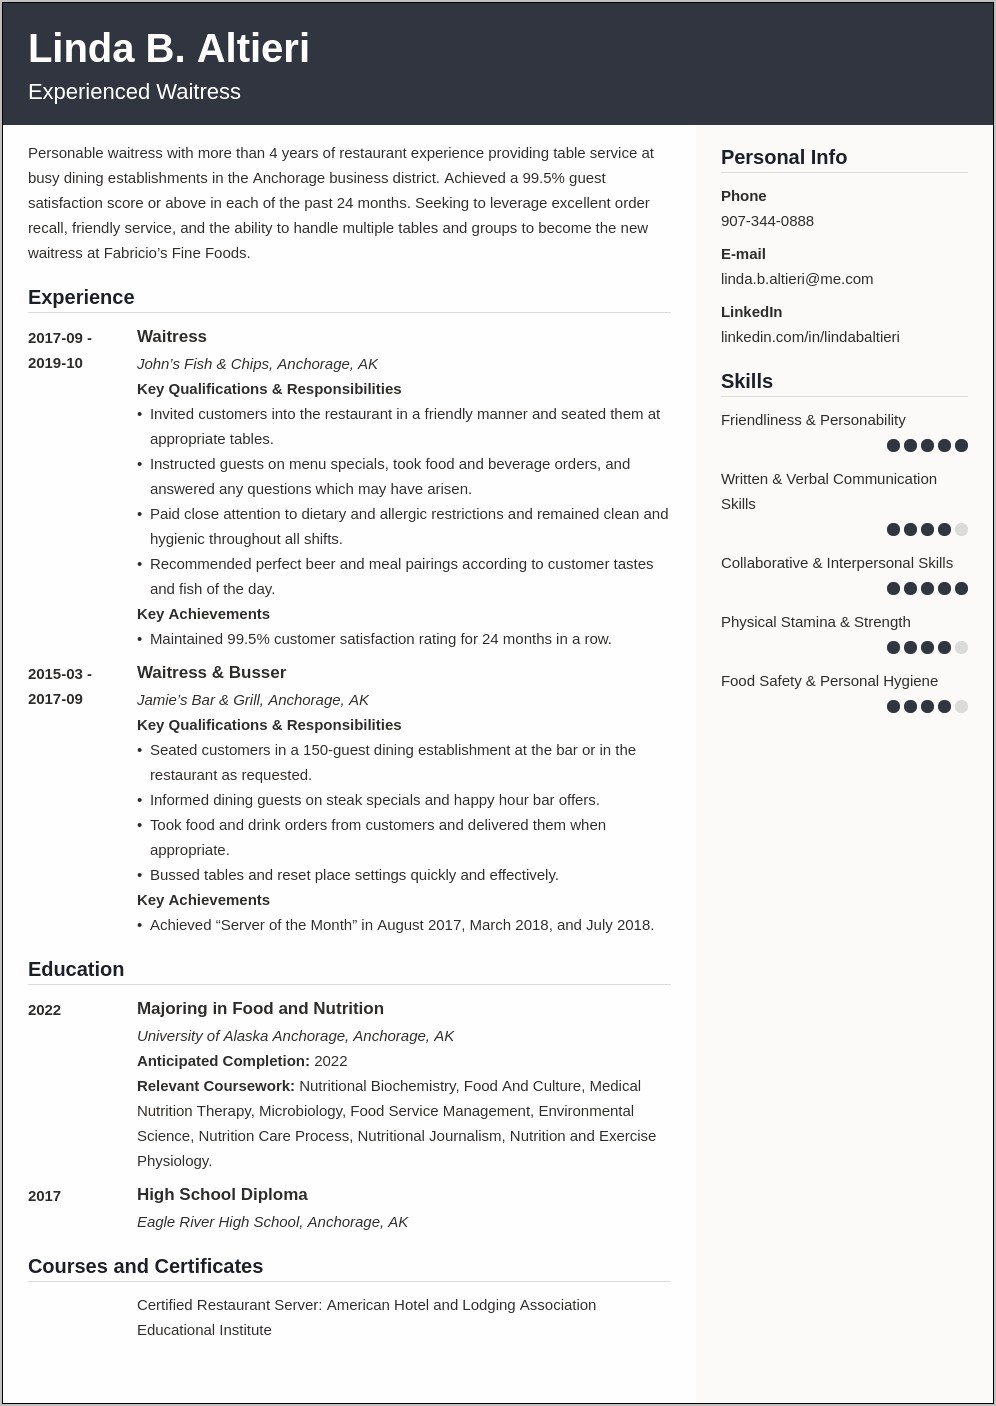 Resume For Waitress Position With No Experience